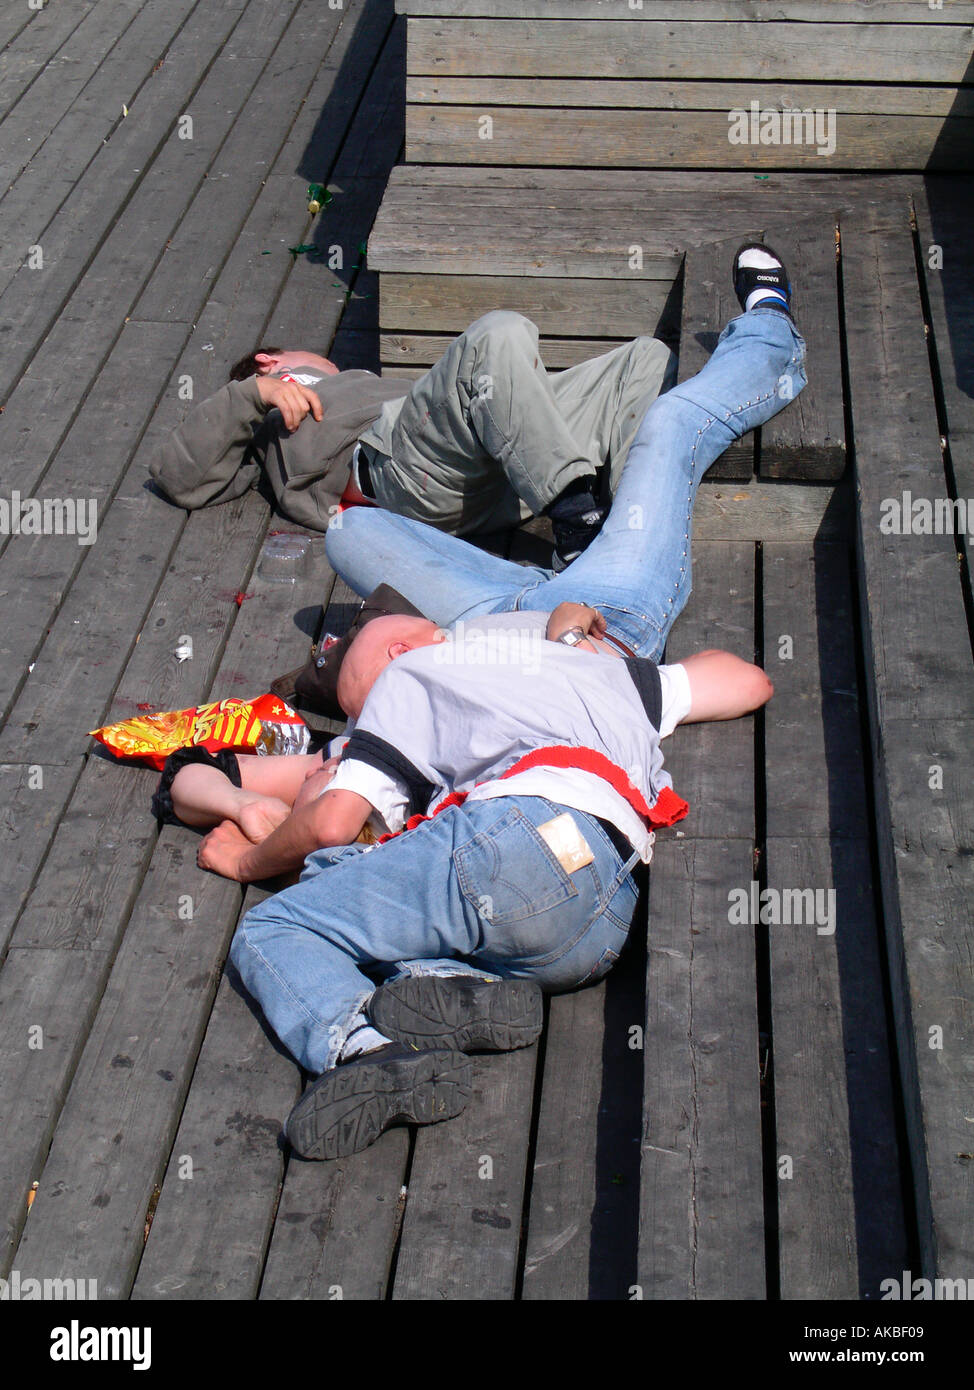 group of drunks sleeping together outdoors Stock Photo